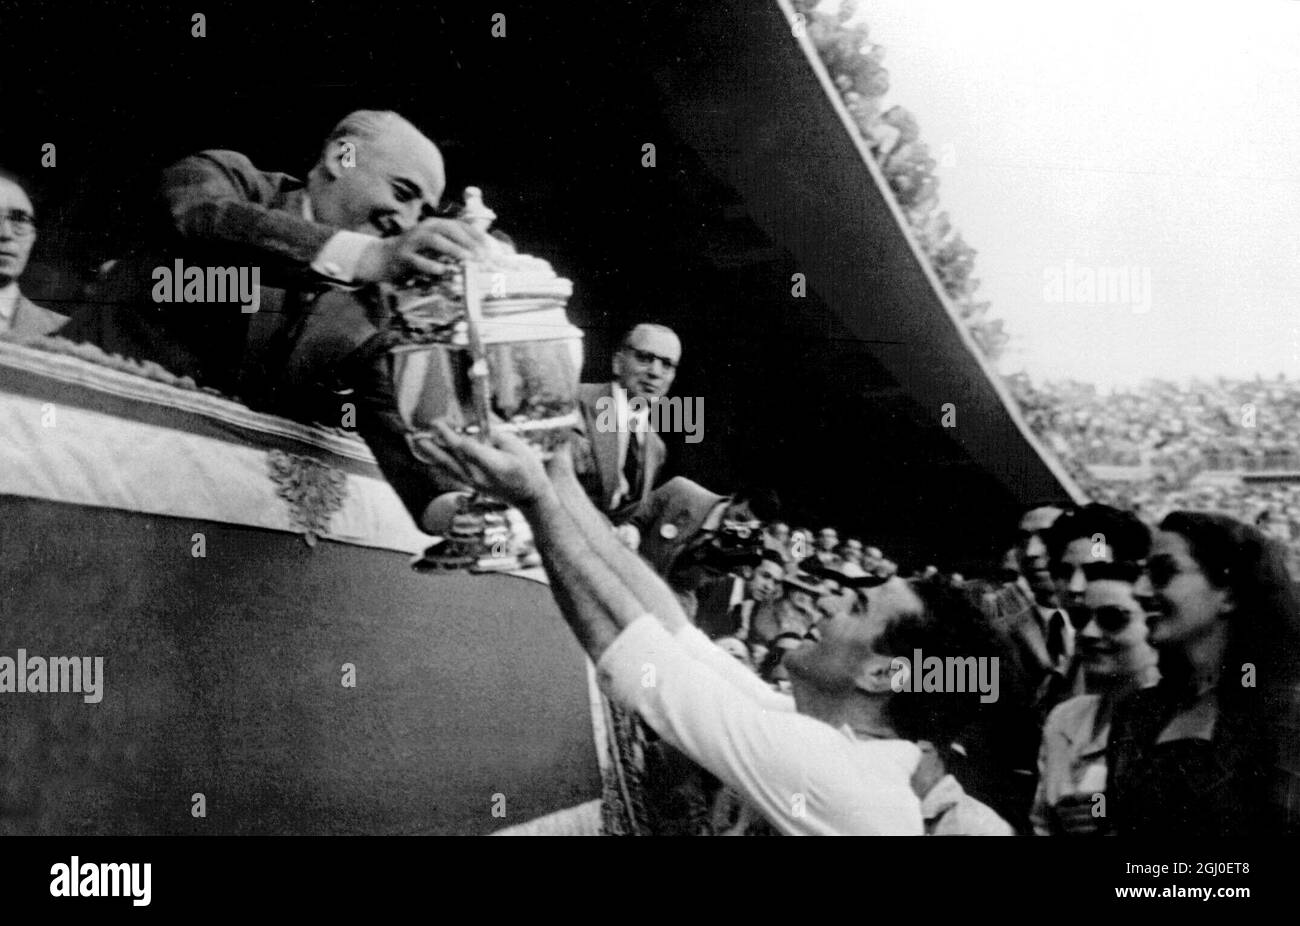 65,000 soccer fans saw the Seville Soccer Club win the Cup of Spain by defeating the Celta de Vigo Club 4-1 at the Chamartin Stadium. General Franco who attended the match with his wife, is seen presenting the winning cup to Josquin, captain of the Seville Soccer Club after the match. 9th July 1948. Stock Photo